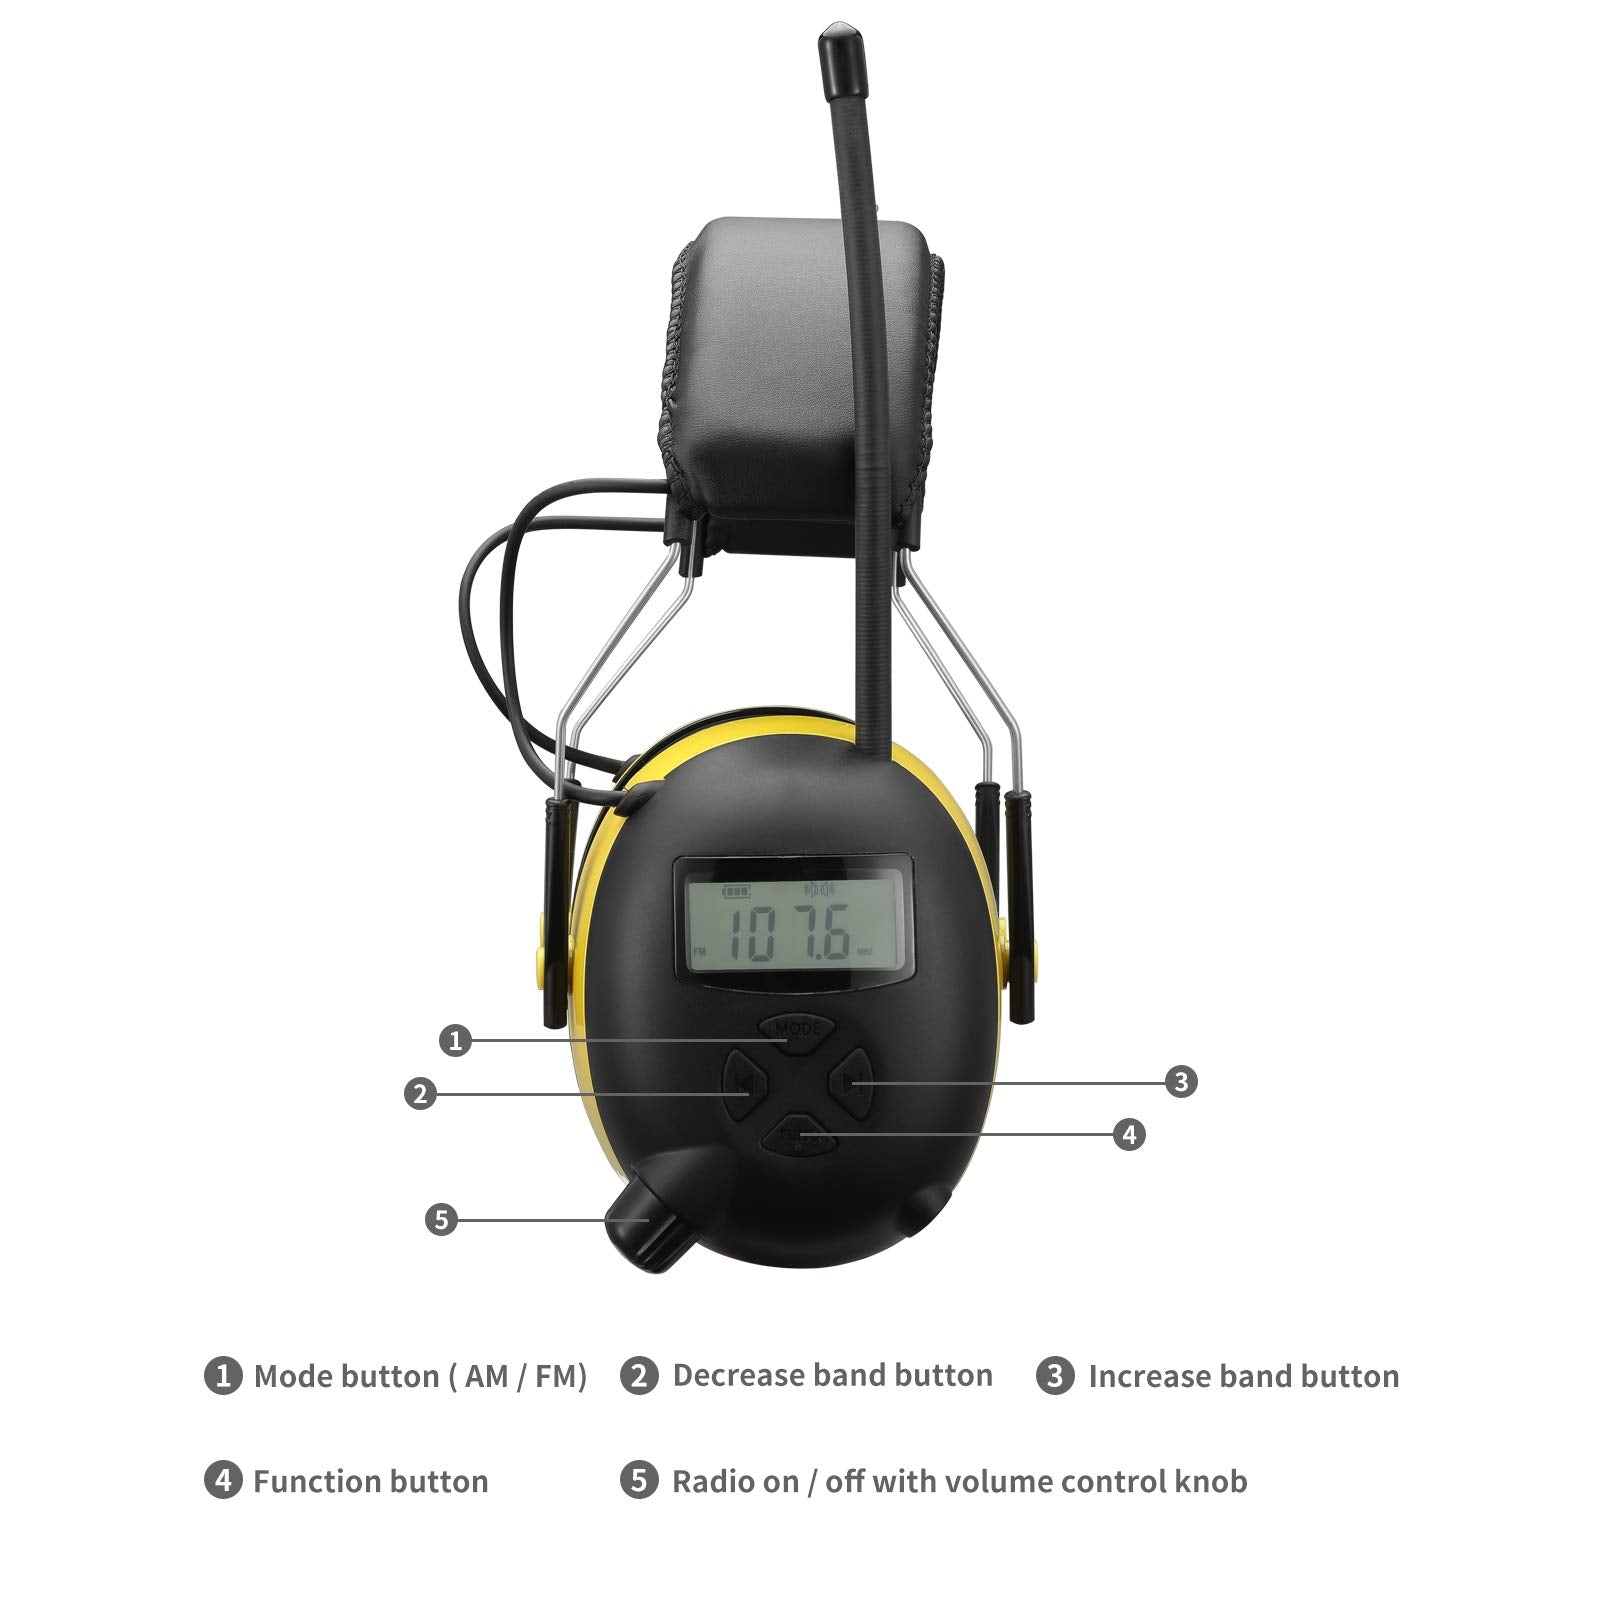 Am/Fm Radio Hearing Protector ONLYEST